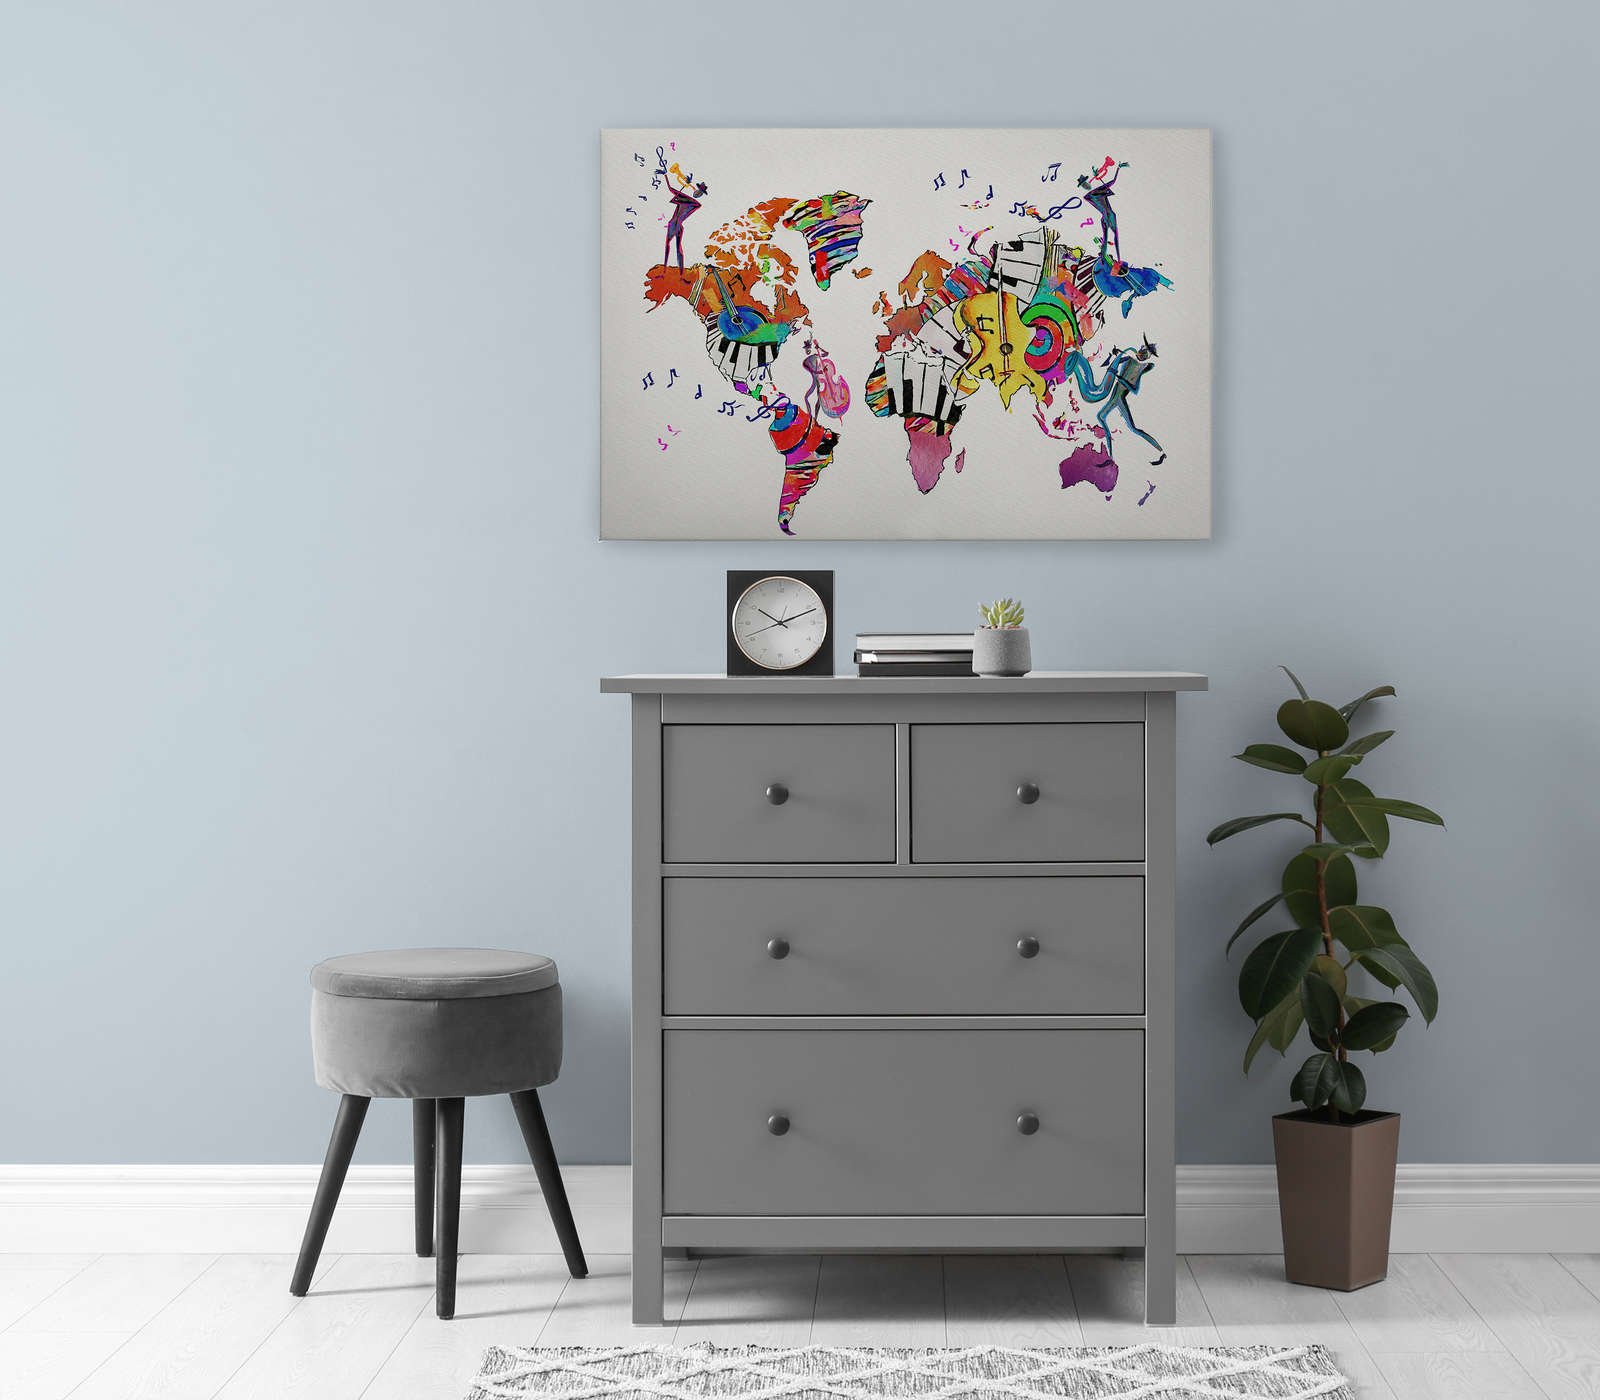             Canvas painting with world map filled with instruments and clefs - 0.90 m x 0.60 m
        